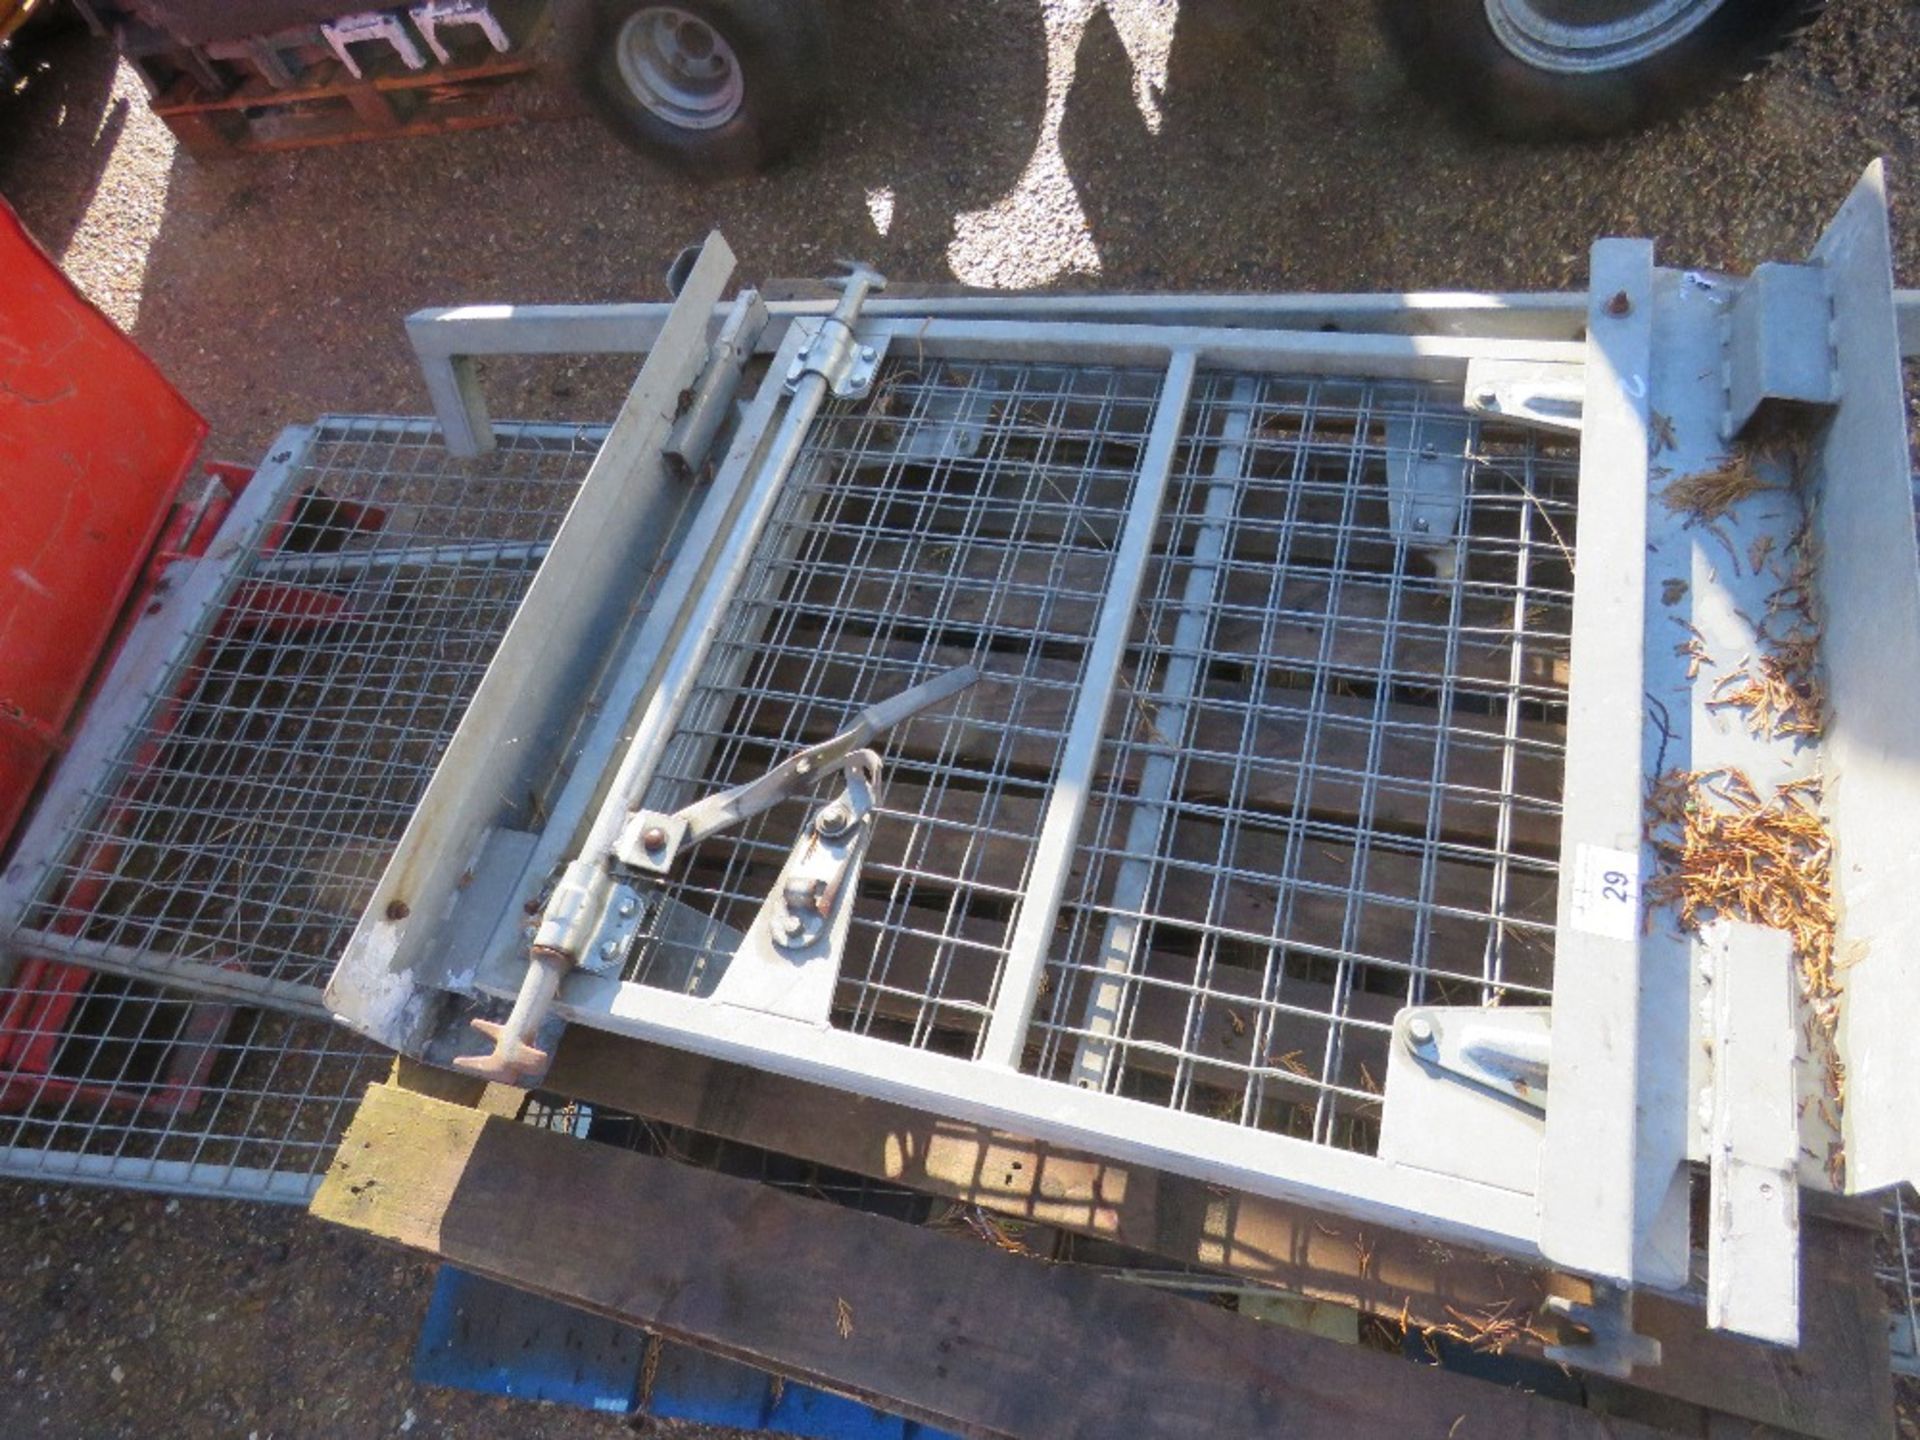 2 X MESH CAGE SIDES PLUS BARN DOORS PREVIOUSLY USED ON 3500KG TIPPER. 10FT LENGTH APPROX. - Image 3 of 3